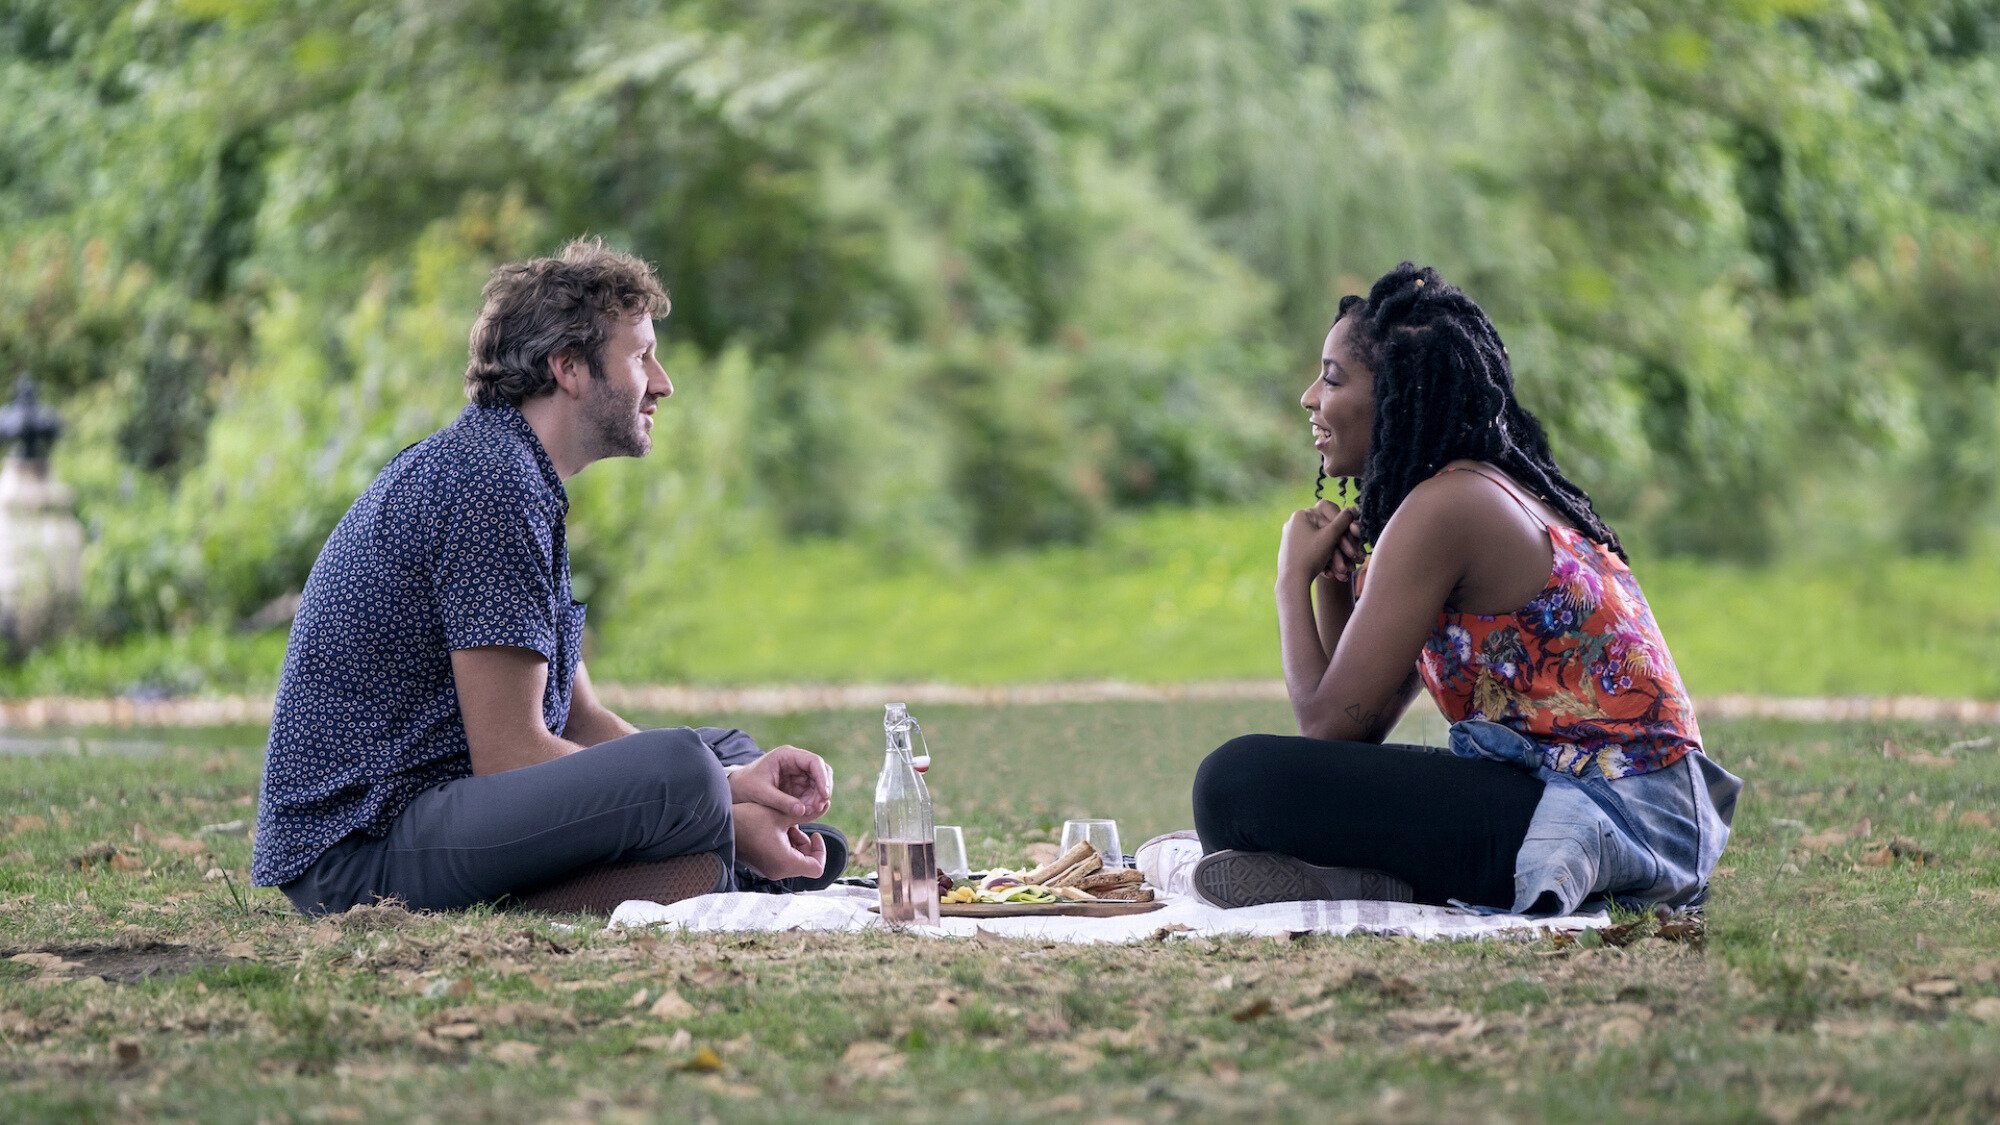 A man and woman have a picnic in a park.